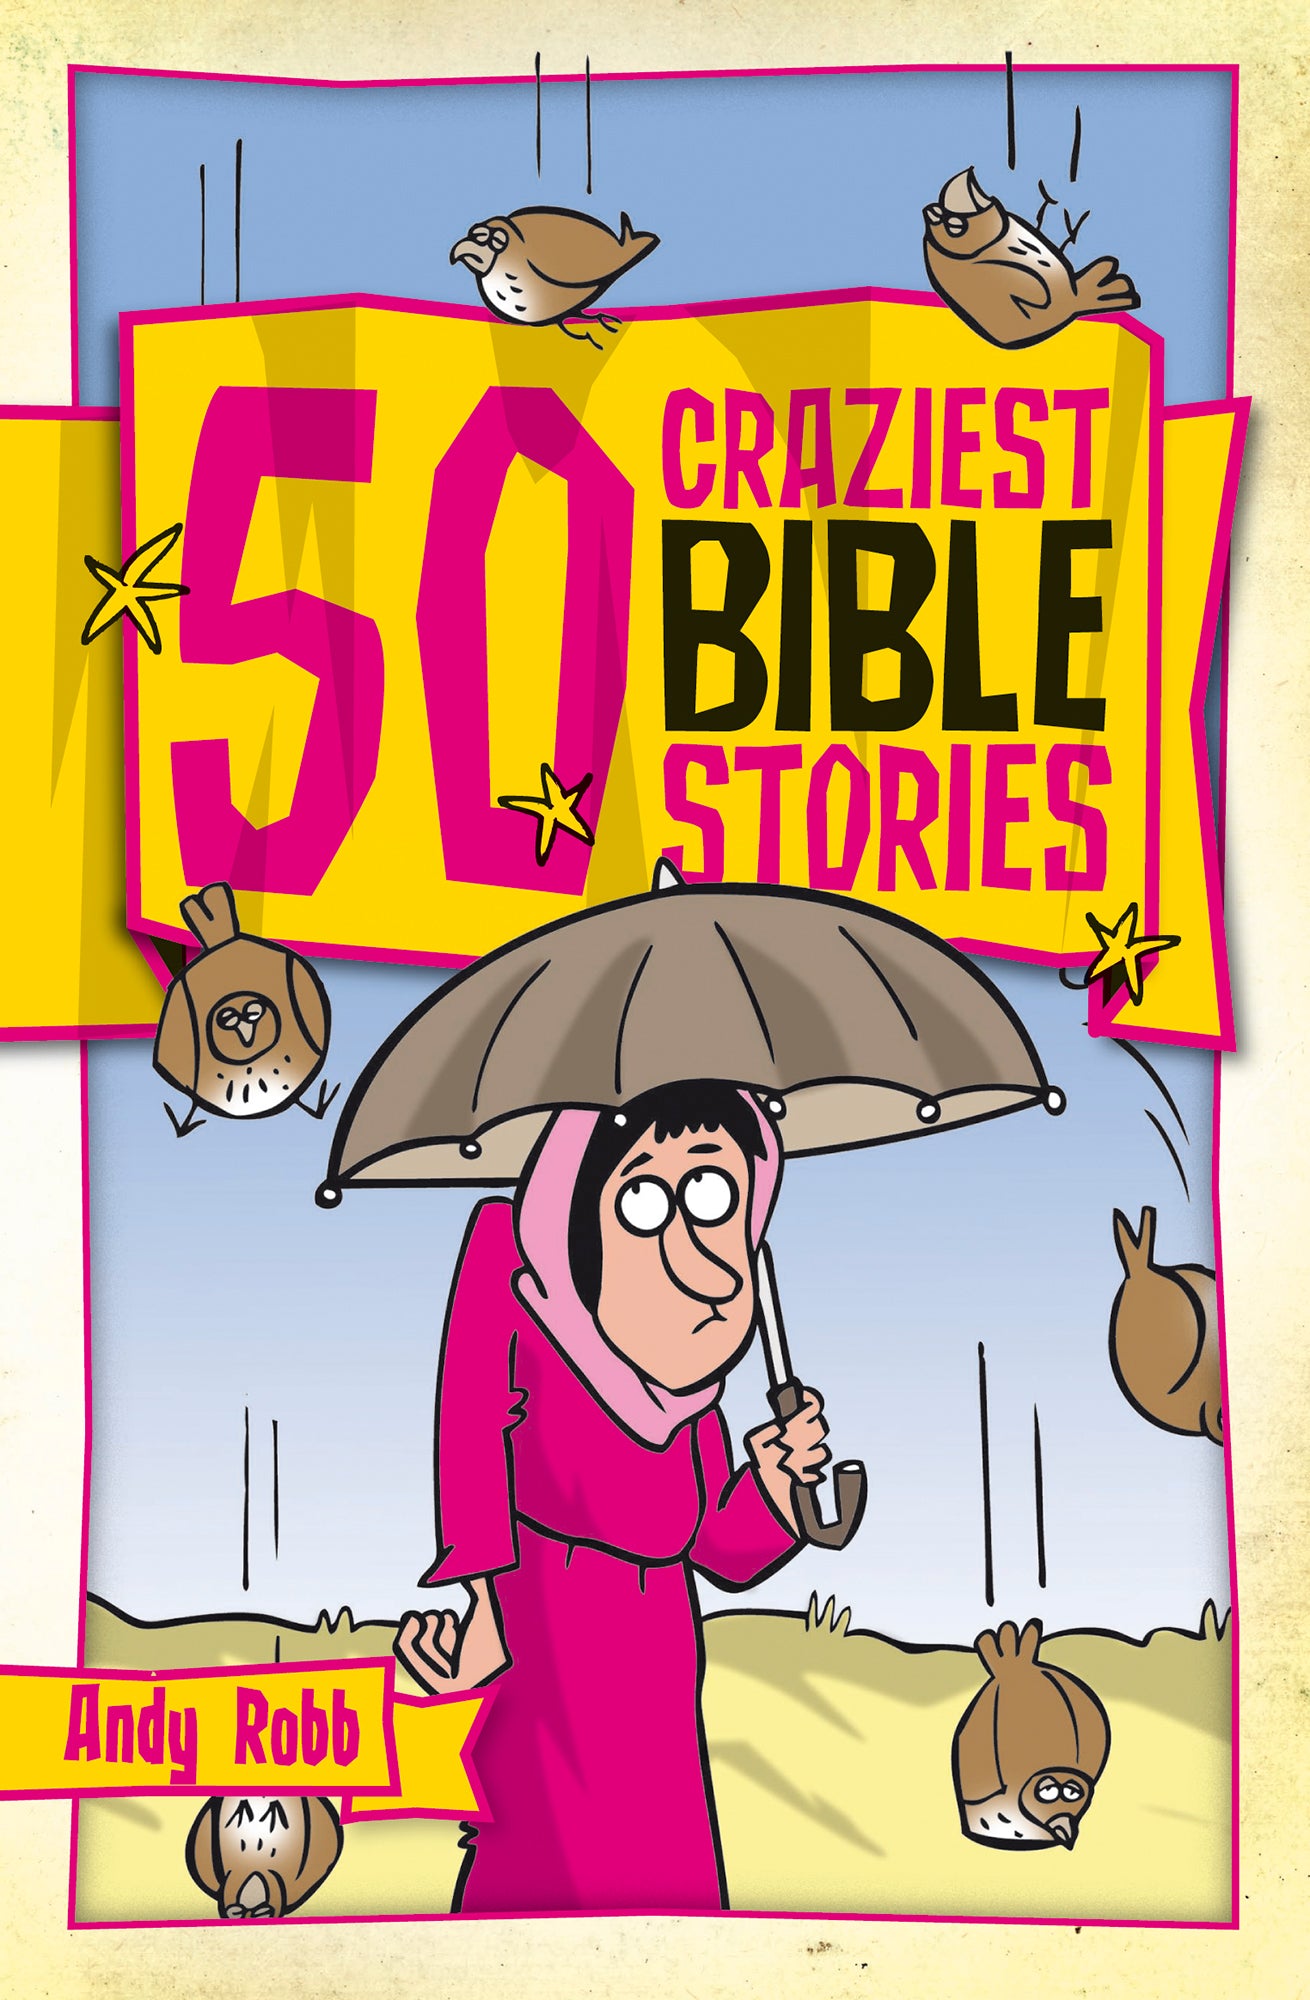 Image of 50 Craziest Bible Stories other